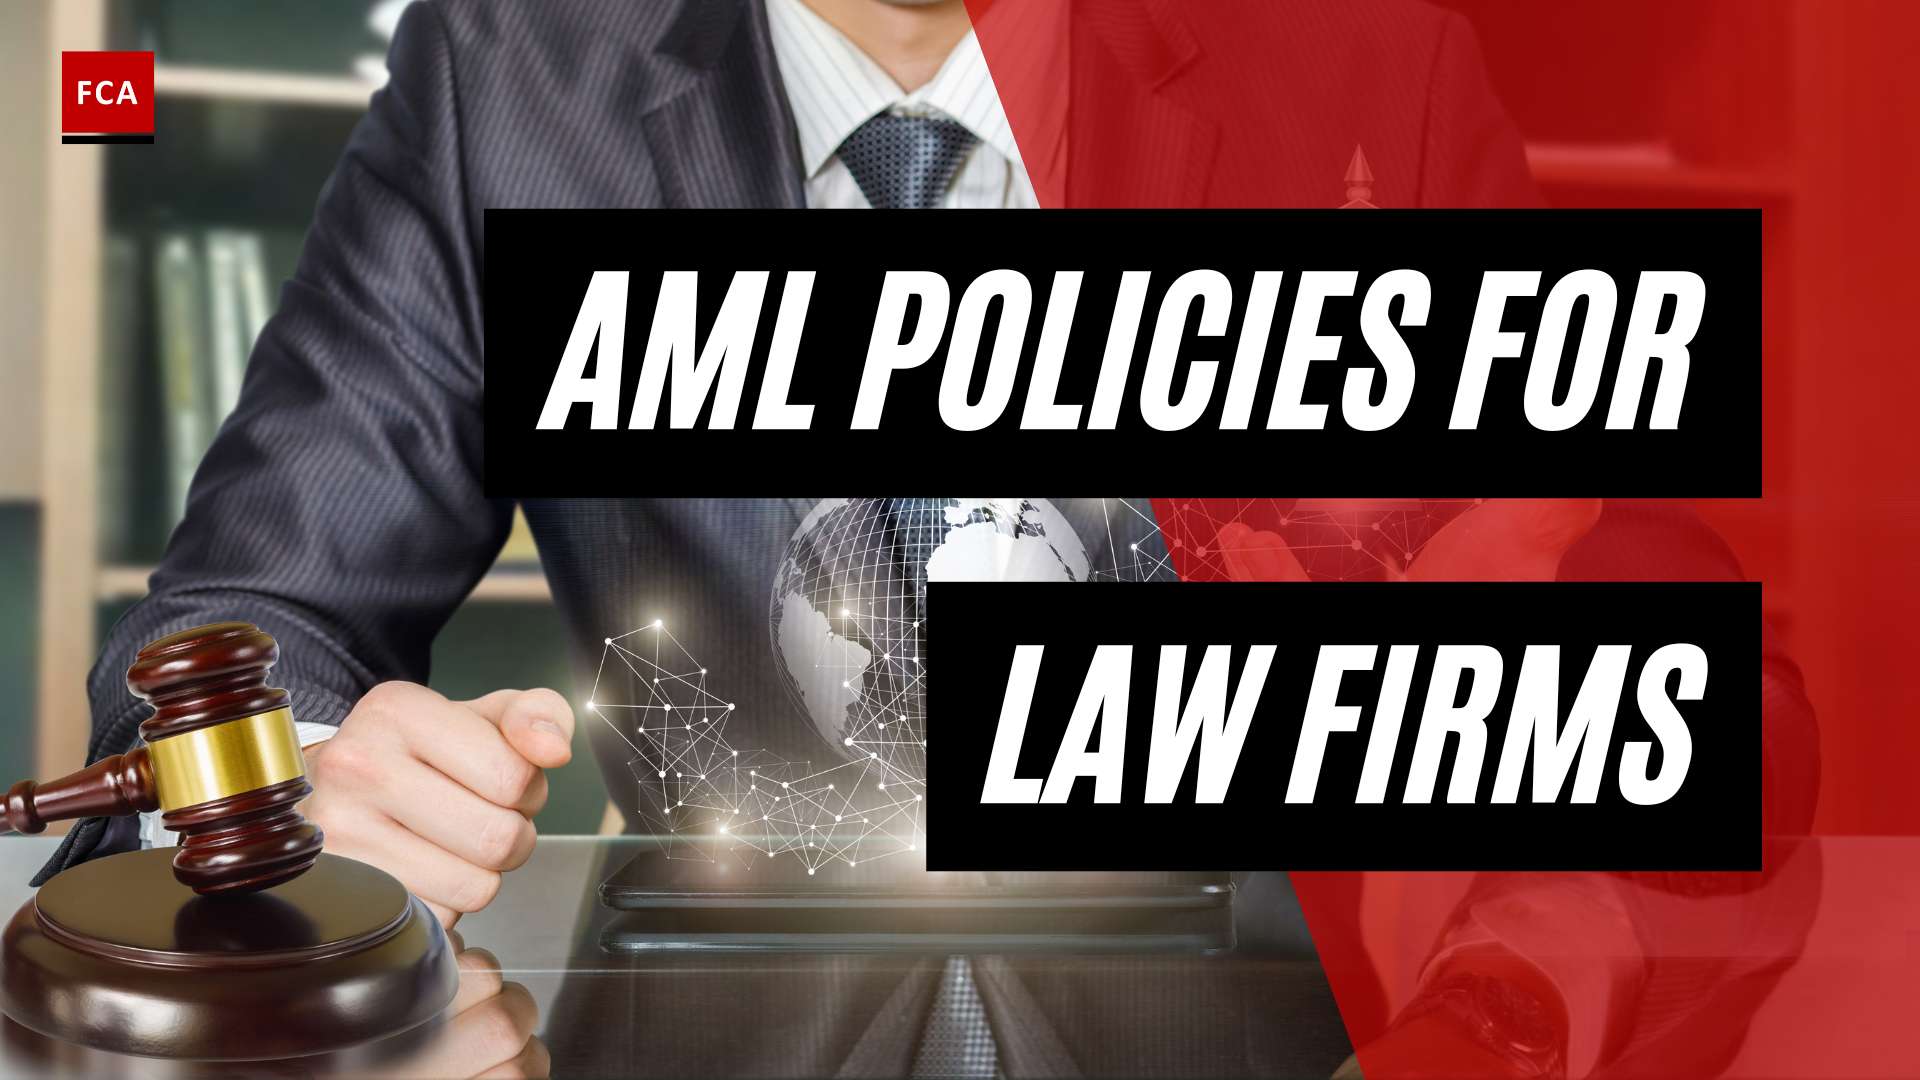 From Compliance To Confidence: Aml Policies For Law Firms Done Right